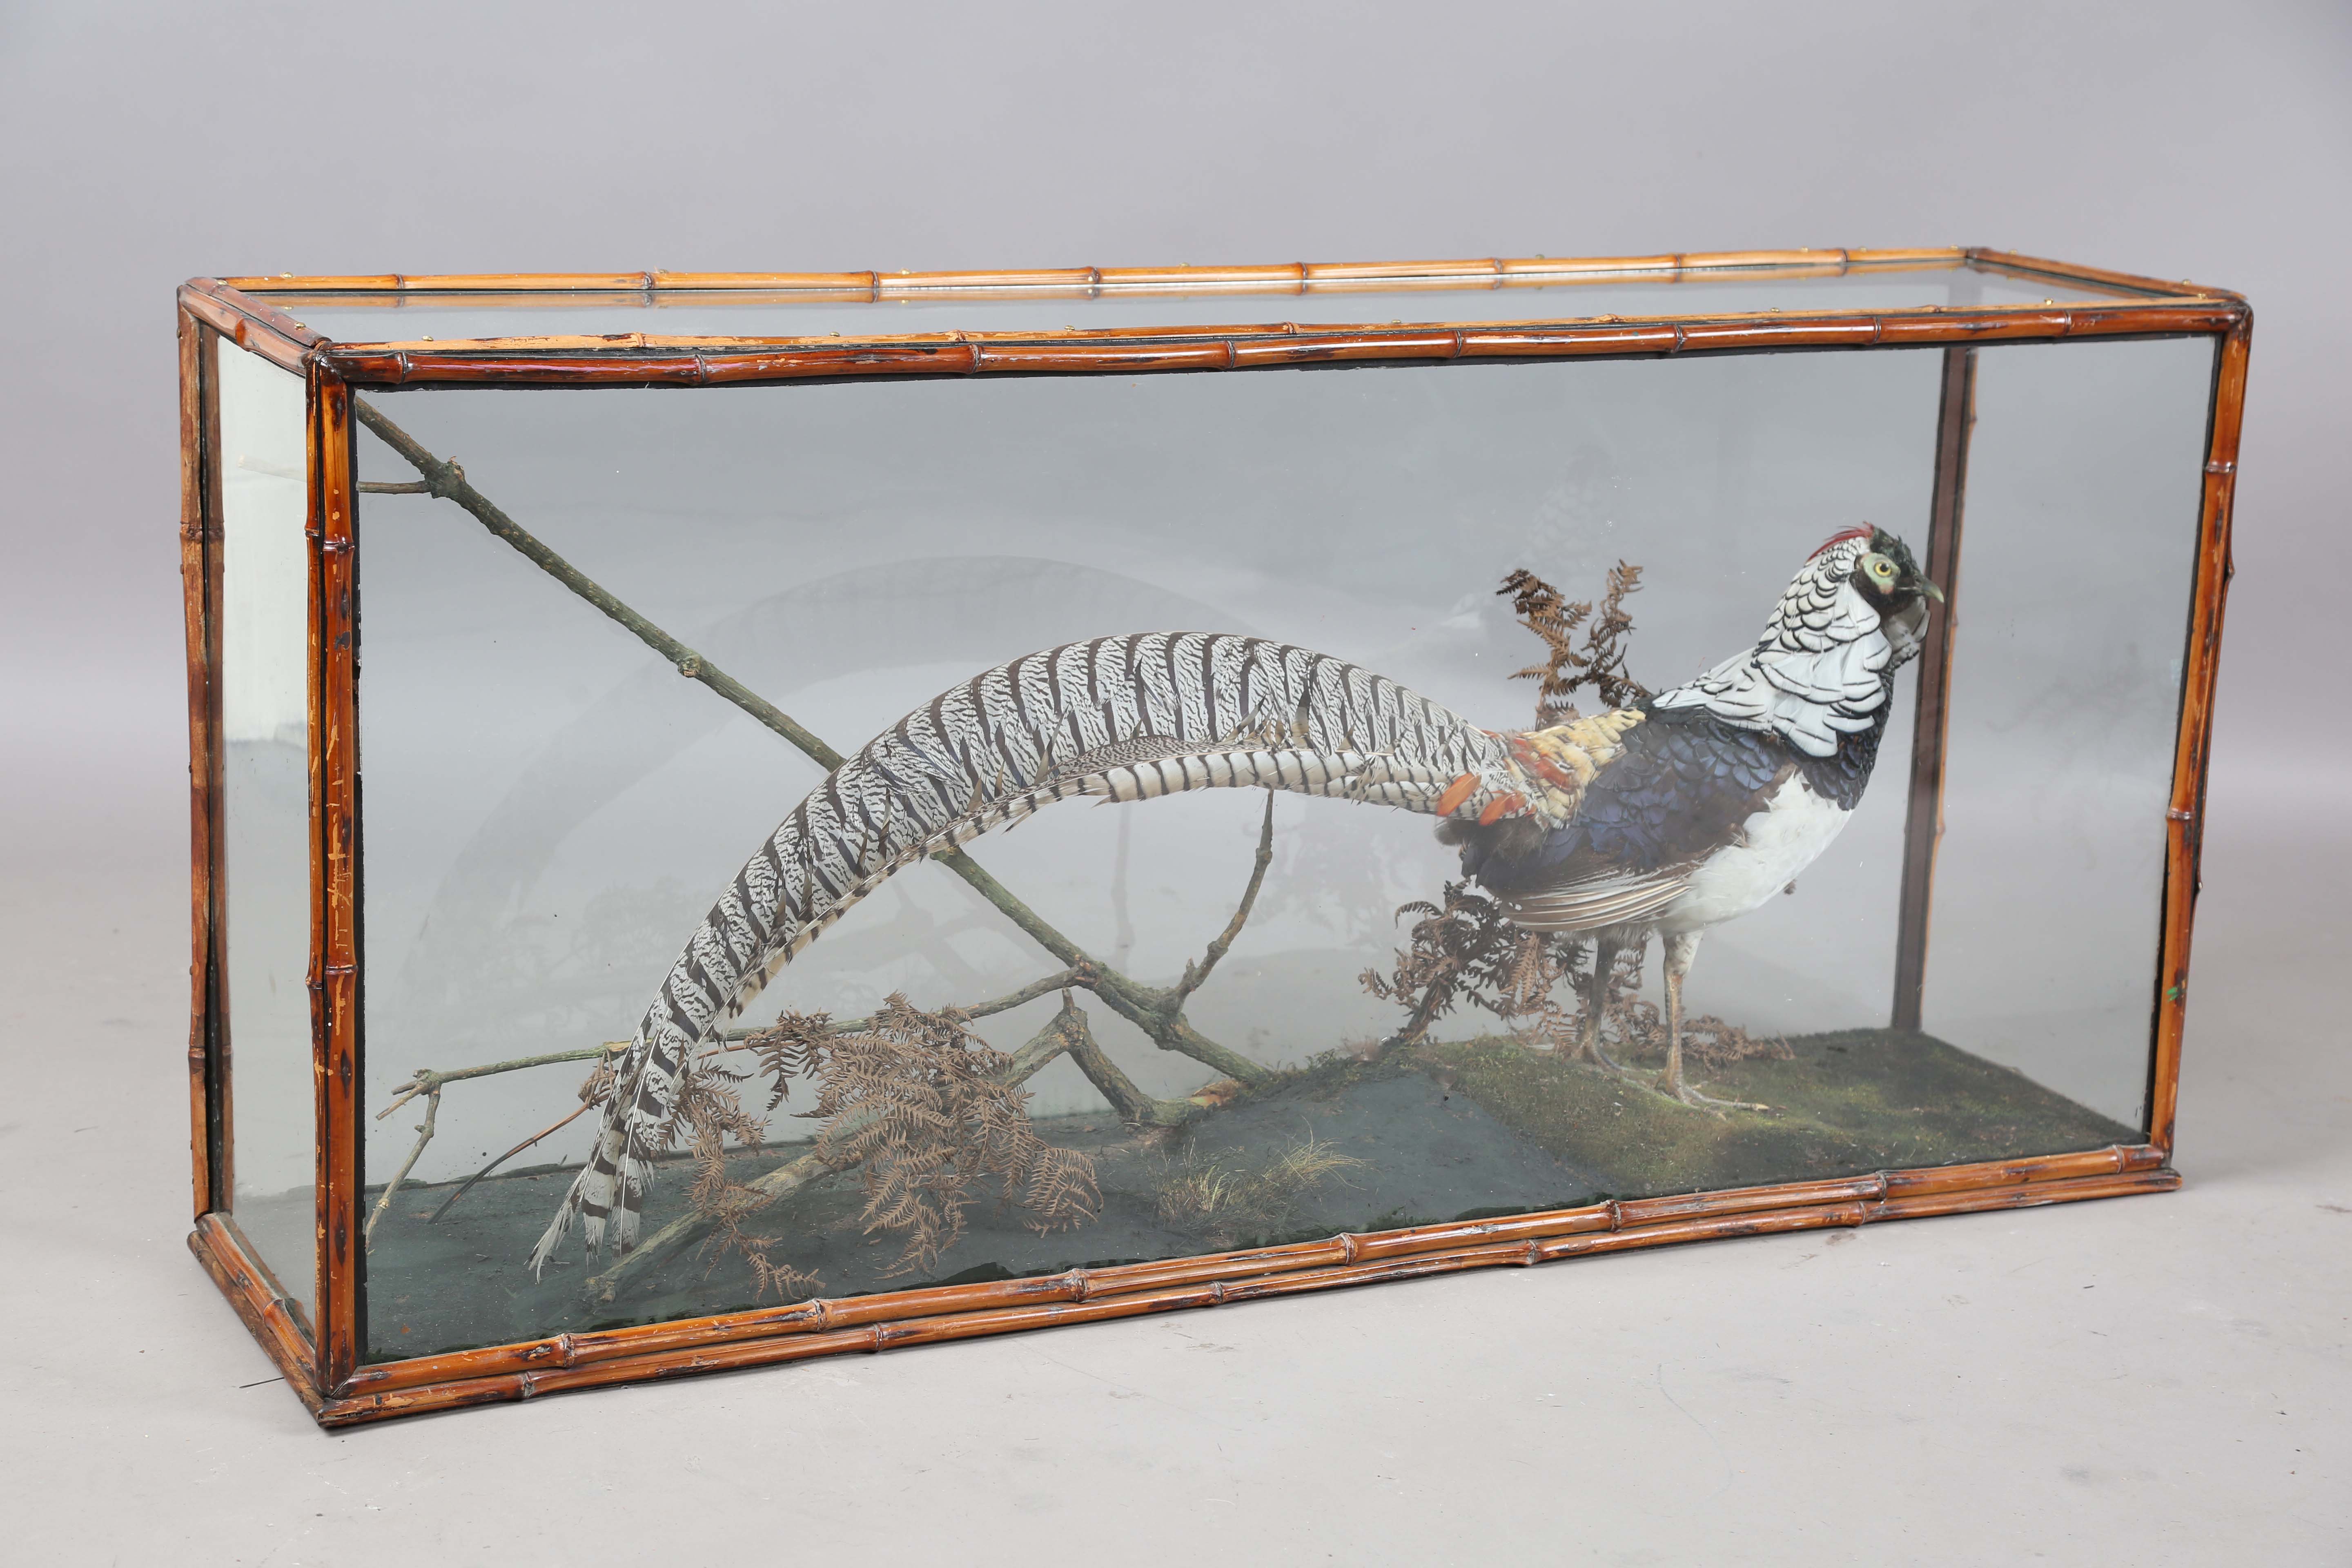 A late Victorian taxidermy specimen of a Lady Amherst's pheasant, mounted within a glazed bamboo